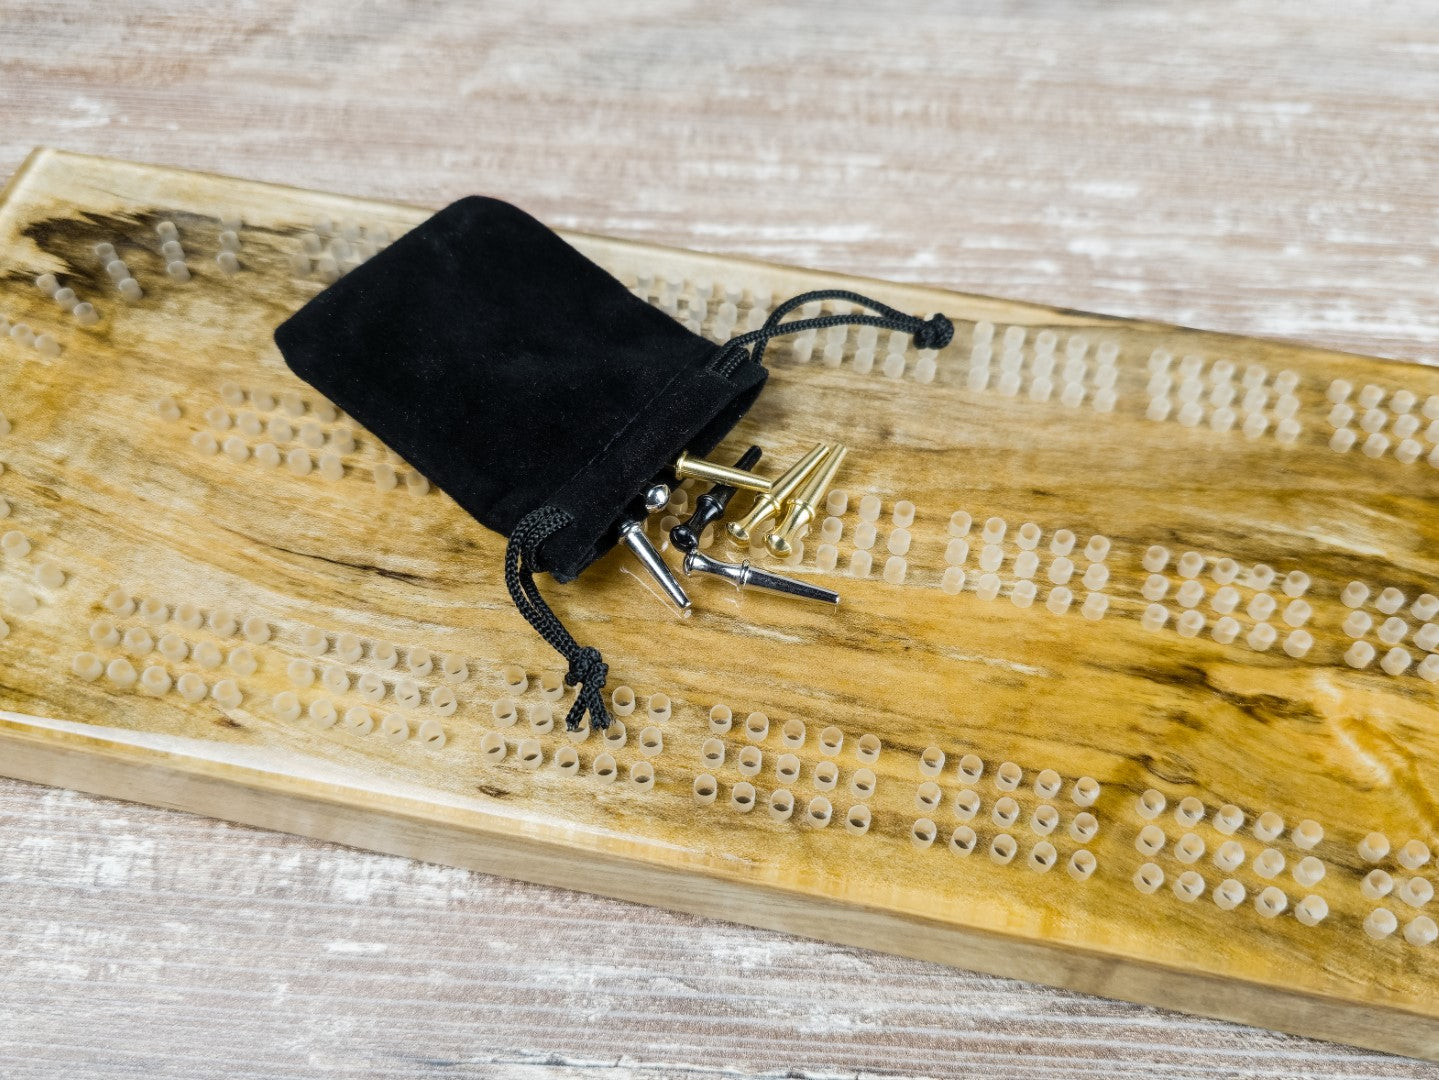 Epoxy Top Spalted Maple Cribbage Board